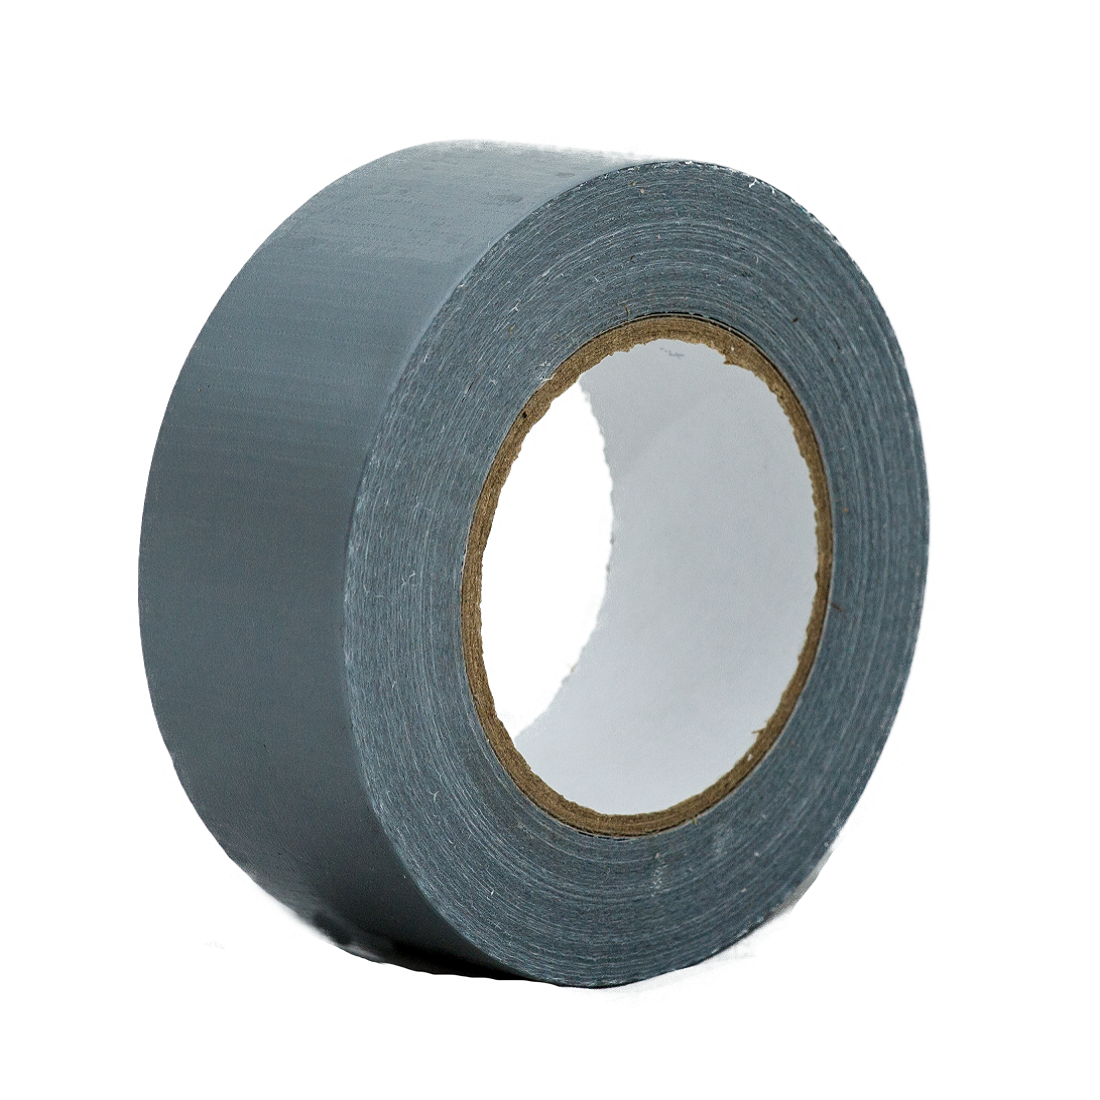 ROLL DUCT GAFFA GAFFER WATERPROOF CLOTH TAPE 48mm x 50m STRONG  SILVER 